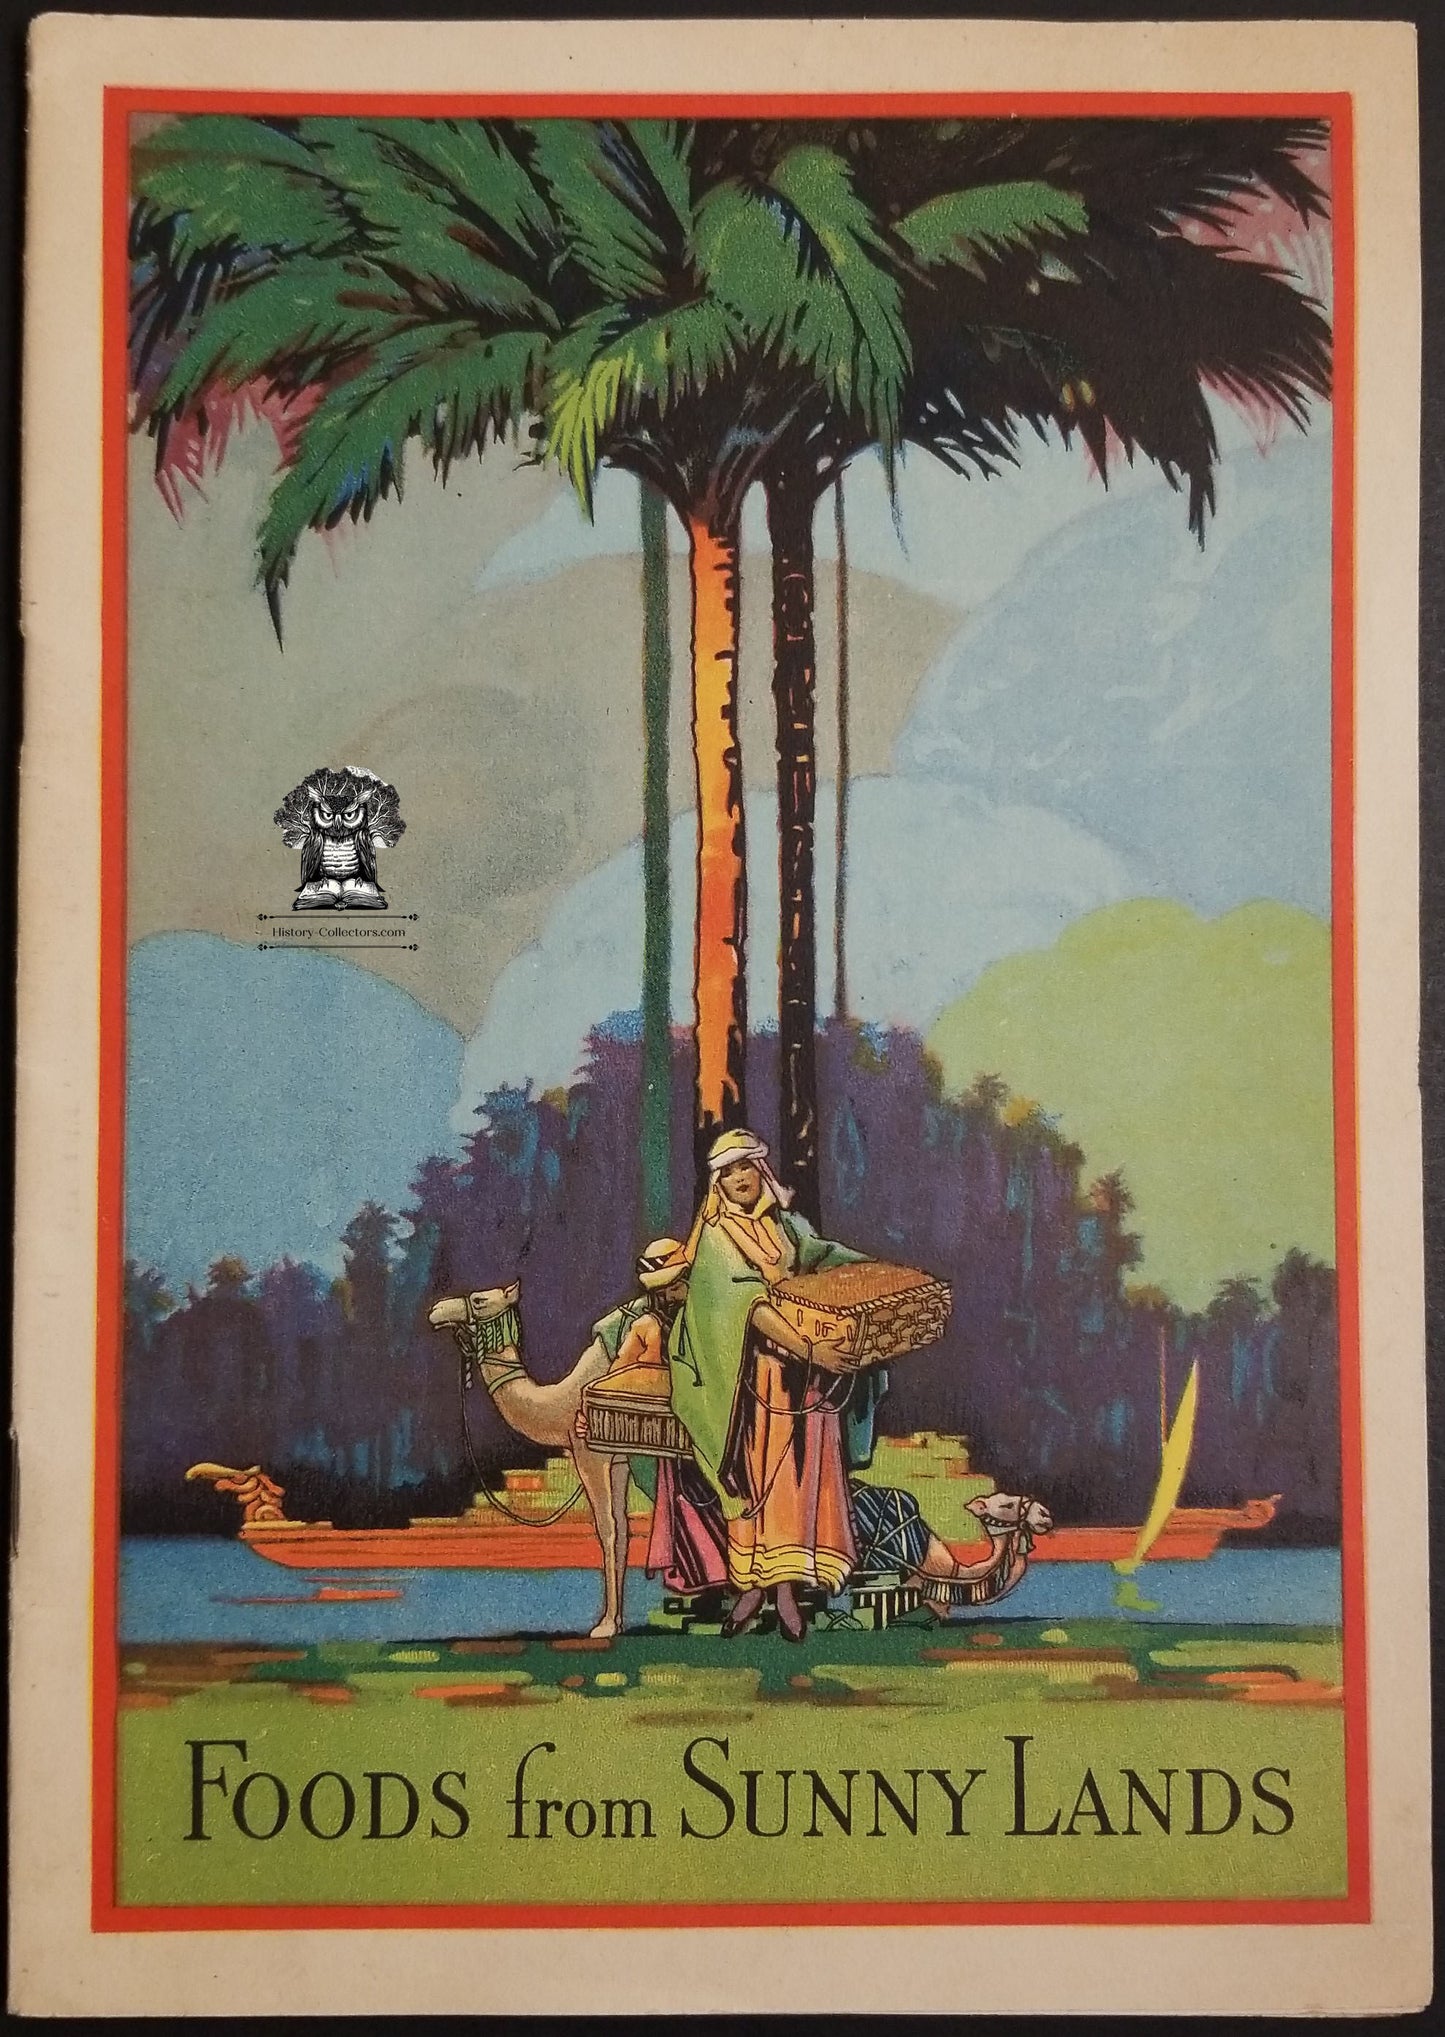 1925 Hills Brothers Dromedary Advertising Foods From Sunny Lands Recipe Booklet - WJ Lund Williamson NY - Orient Indies Dates Figs Coconut Grapefruit